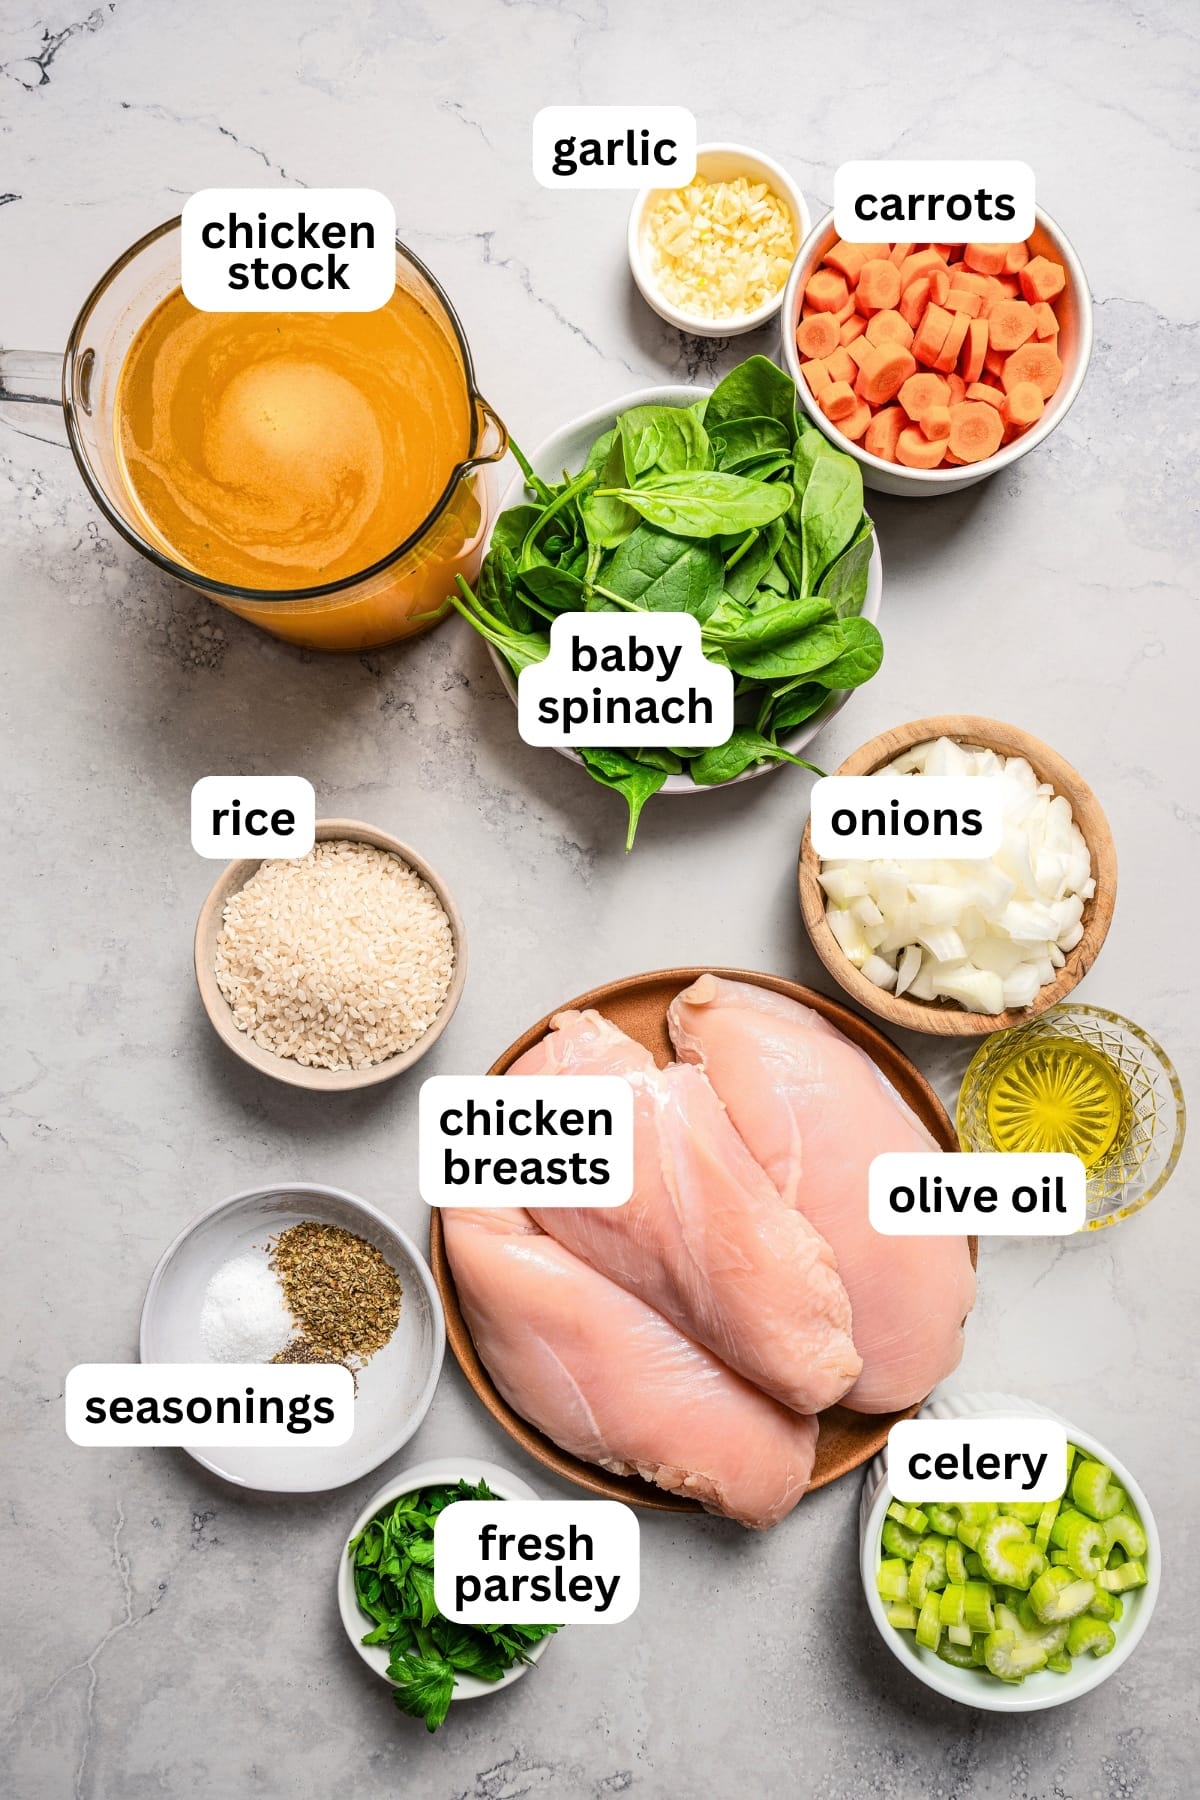 Overhead image of ingredients used to make chicken vegetable soup.